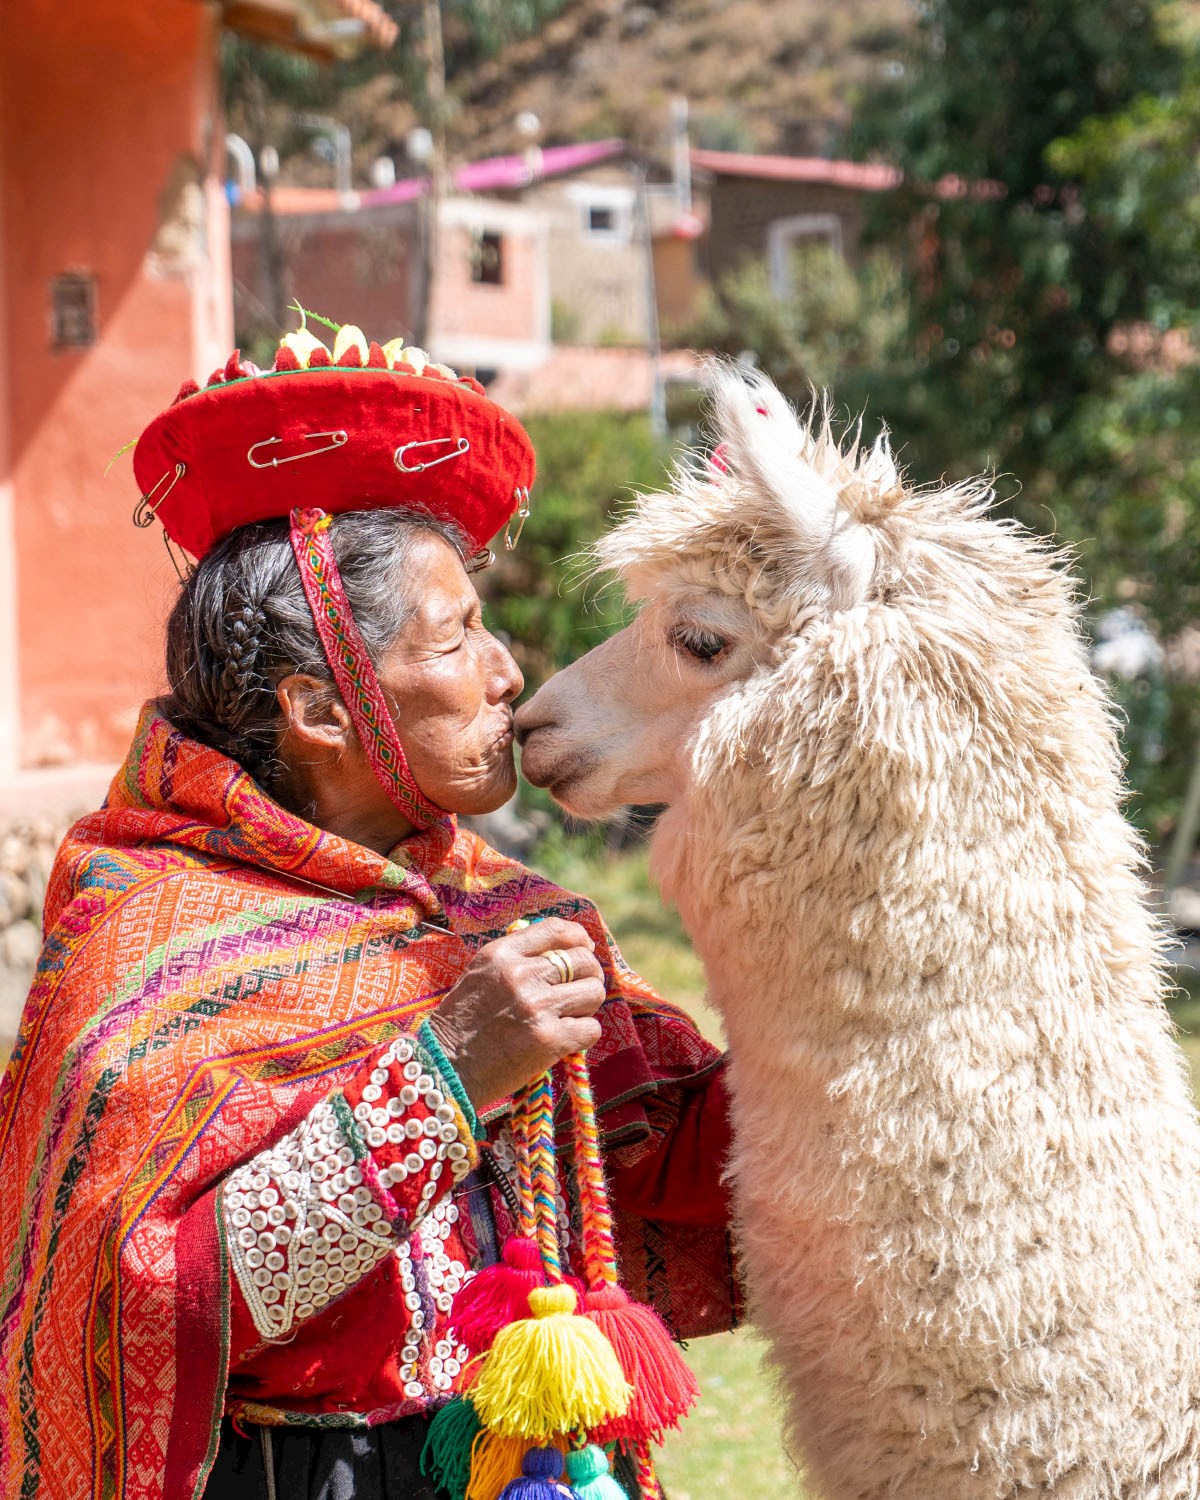 The bond between the locals and the alpacas is ancient - 